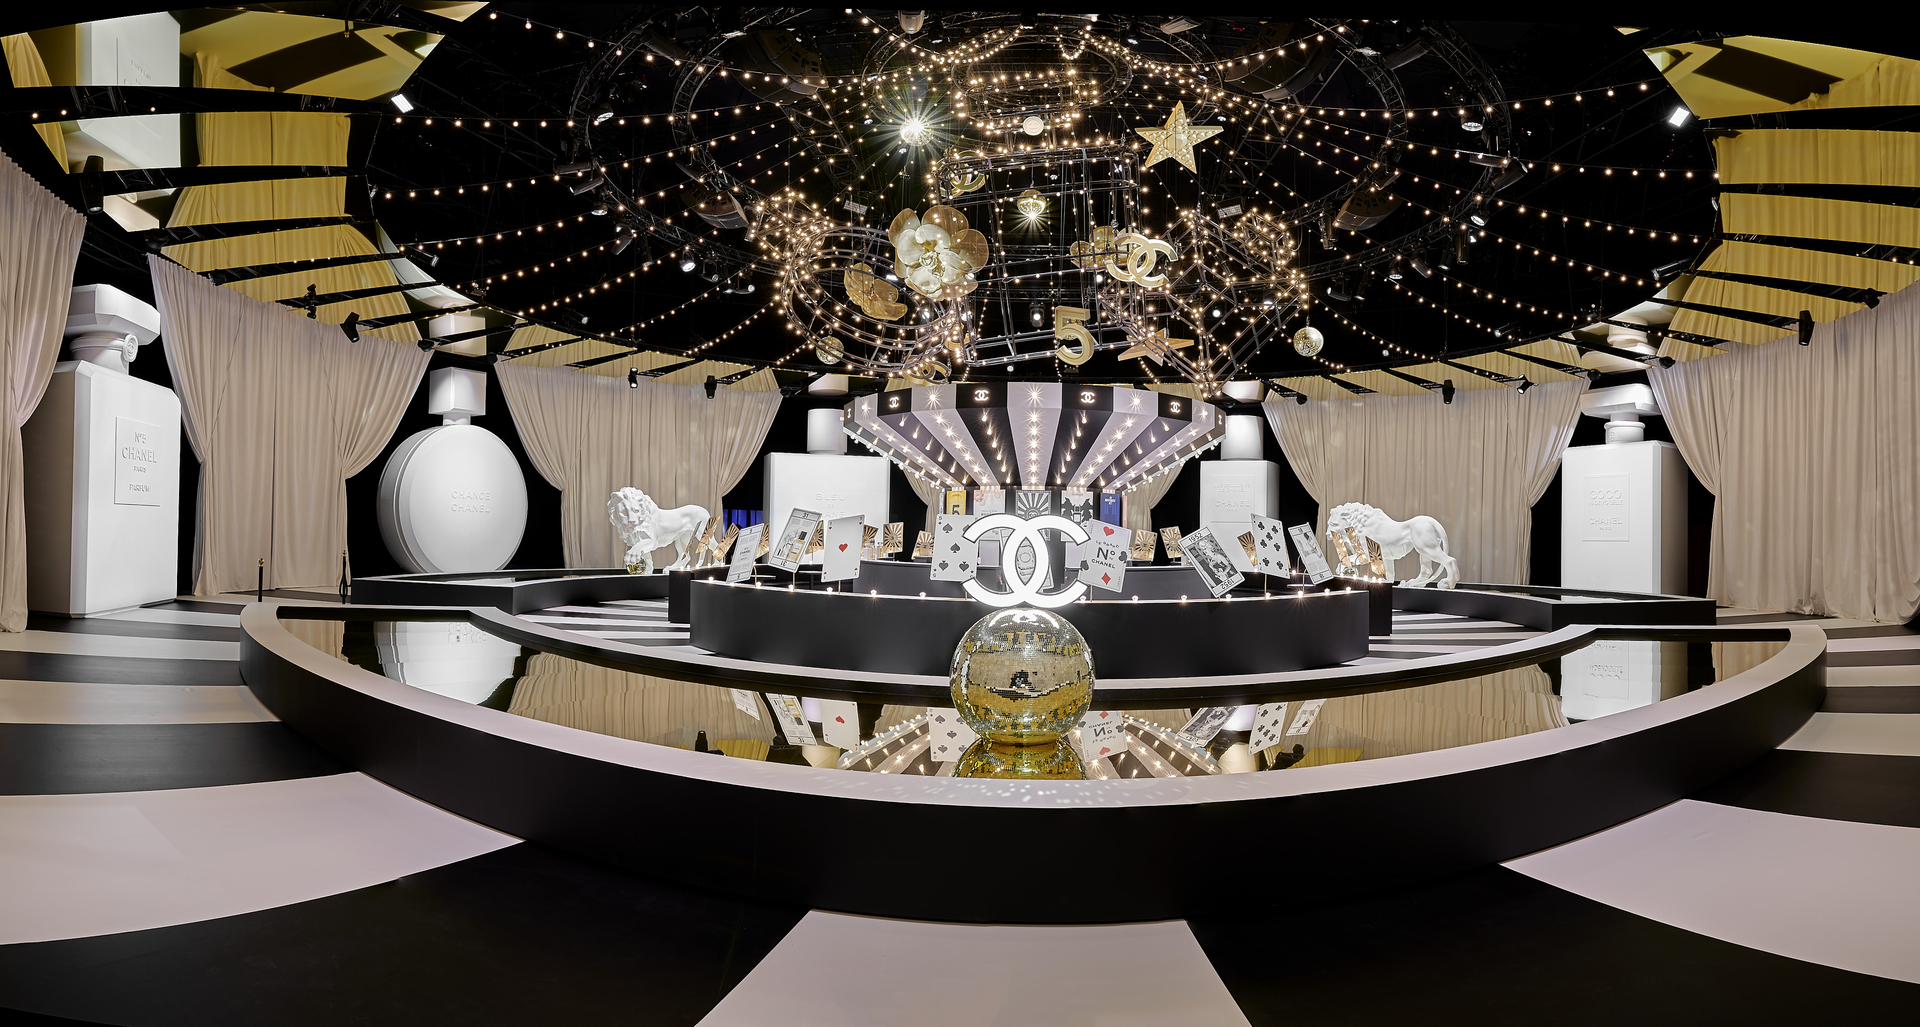 Le Grand Numéro de Chanel: the free and immersive exhibition at the  Temporary Grand Palais 